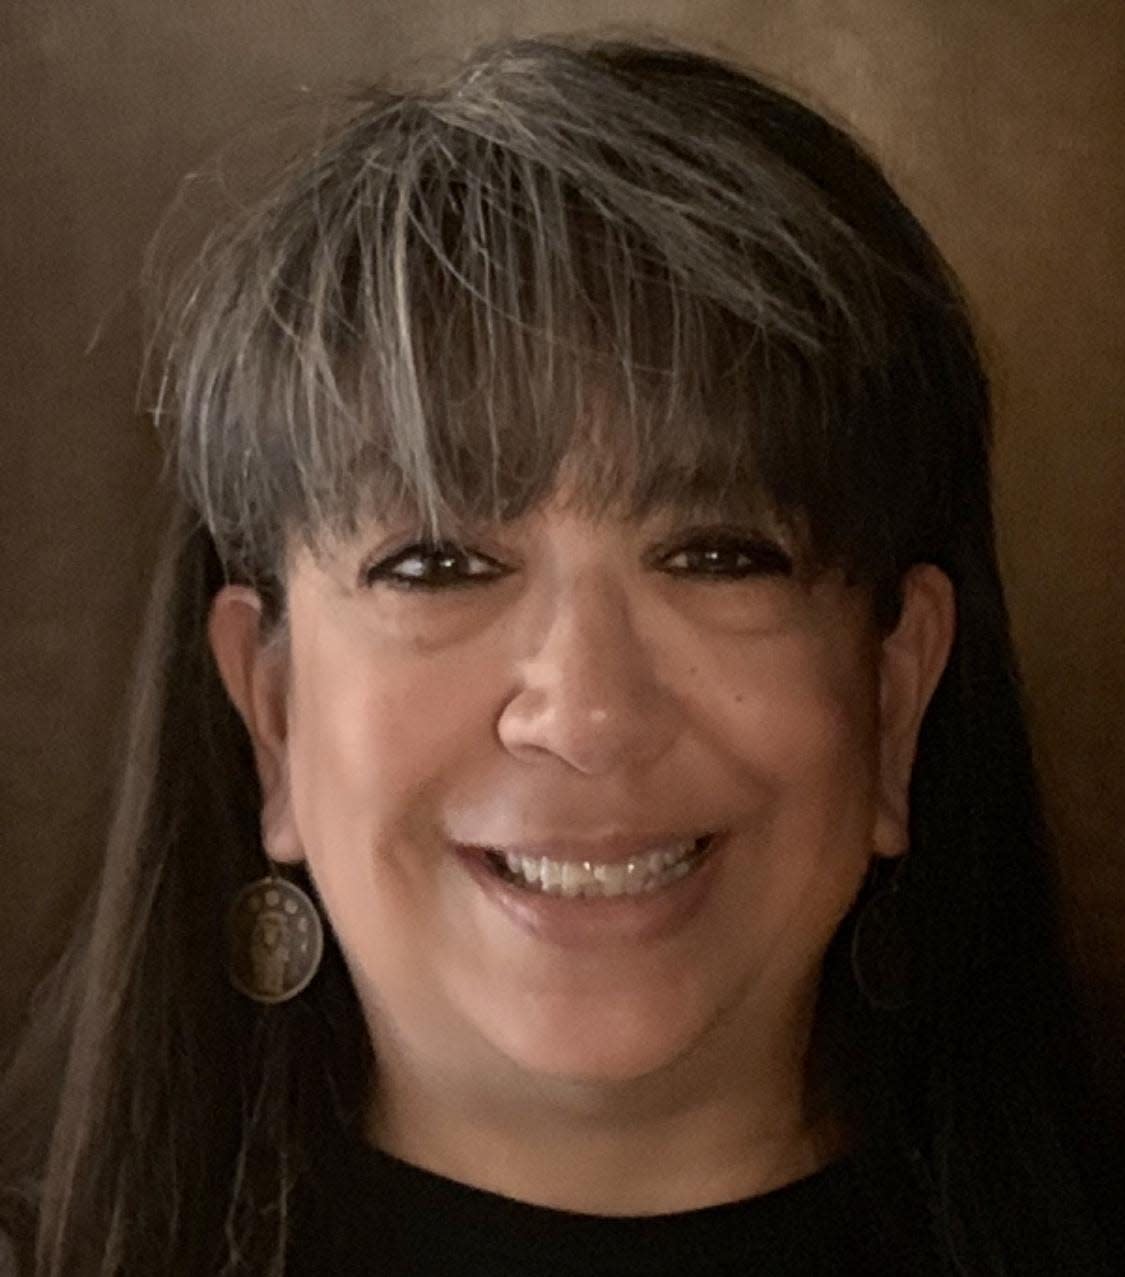 Topeka City Councilwoman Christina Valdivia-Alcala announced Thursday she is running for re-election to the seat she holds representing the council's District 2 in North Topeka and northeast Topeka's Oakland community.